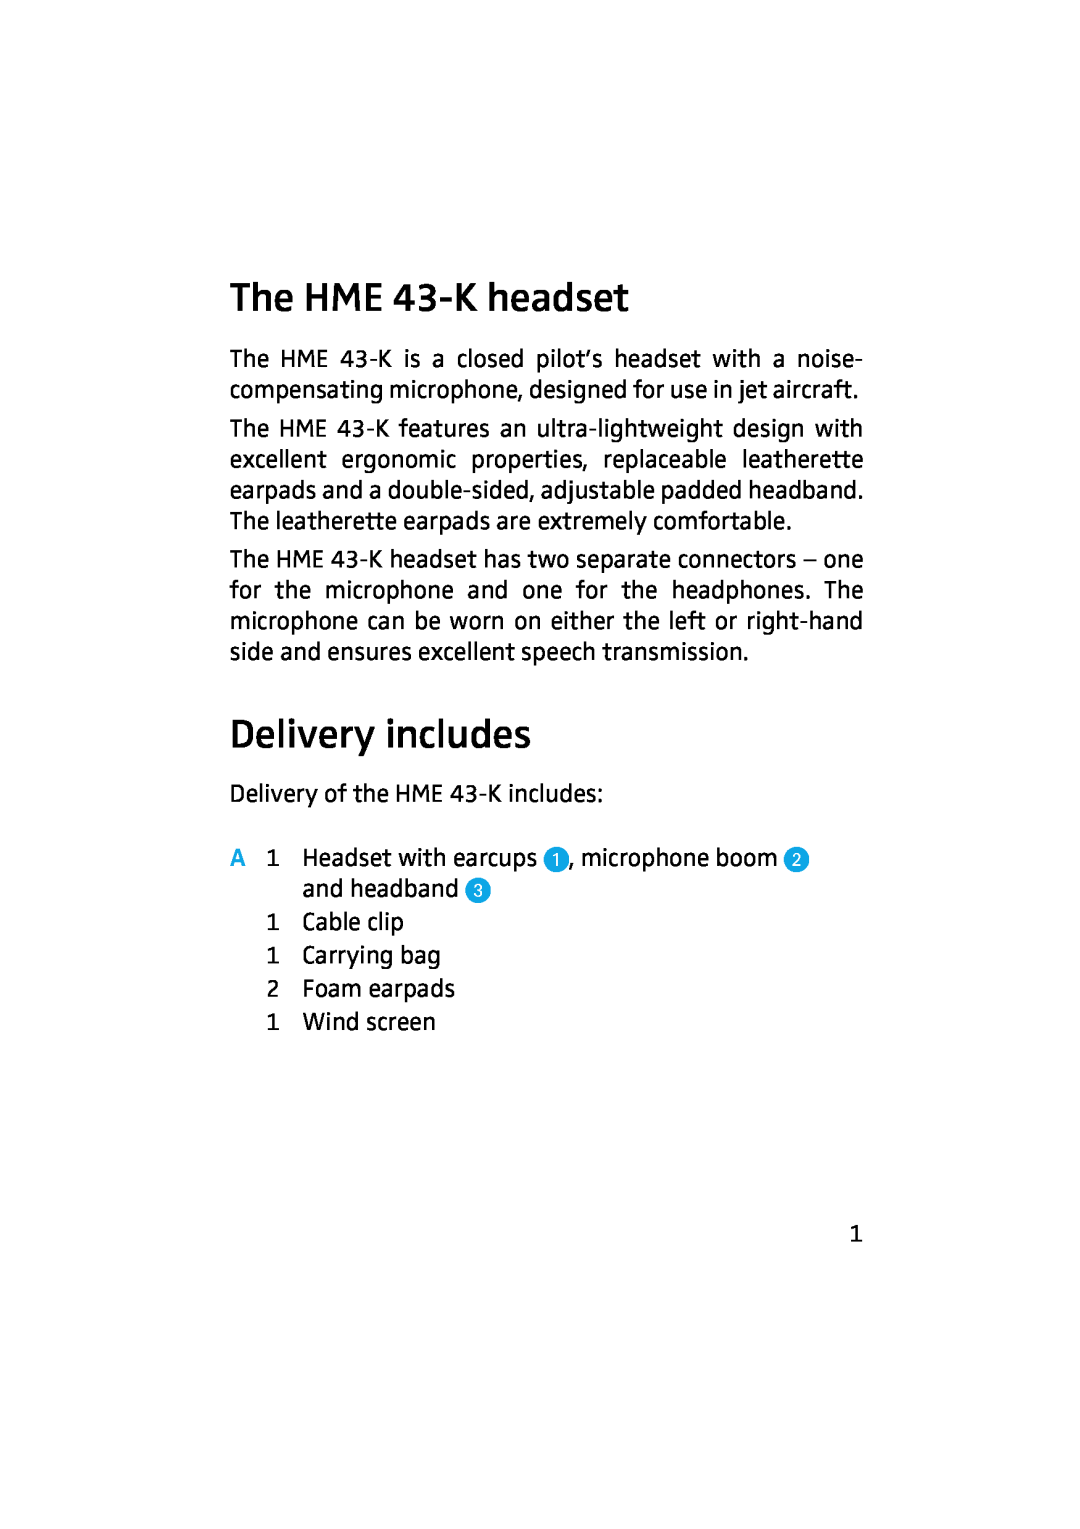 Sennheiser manual The HME 43-Kheadset, Delivery includes 